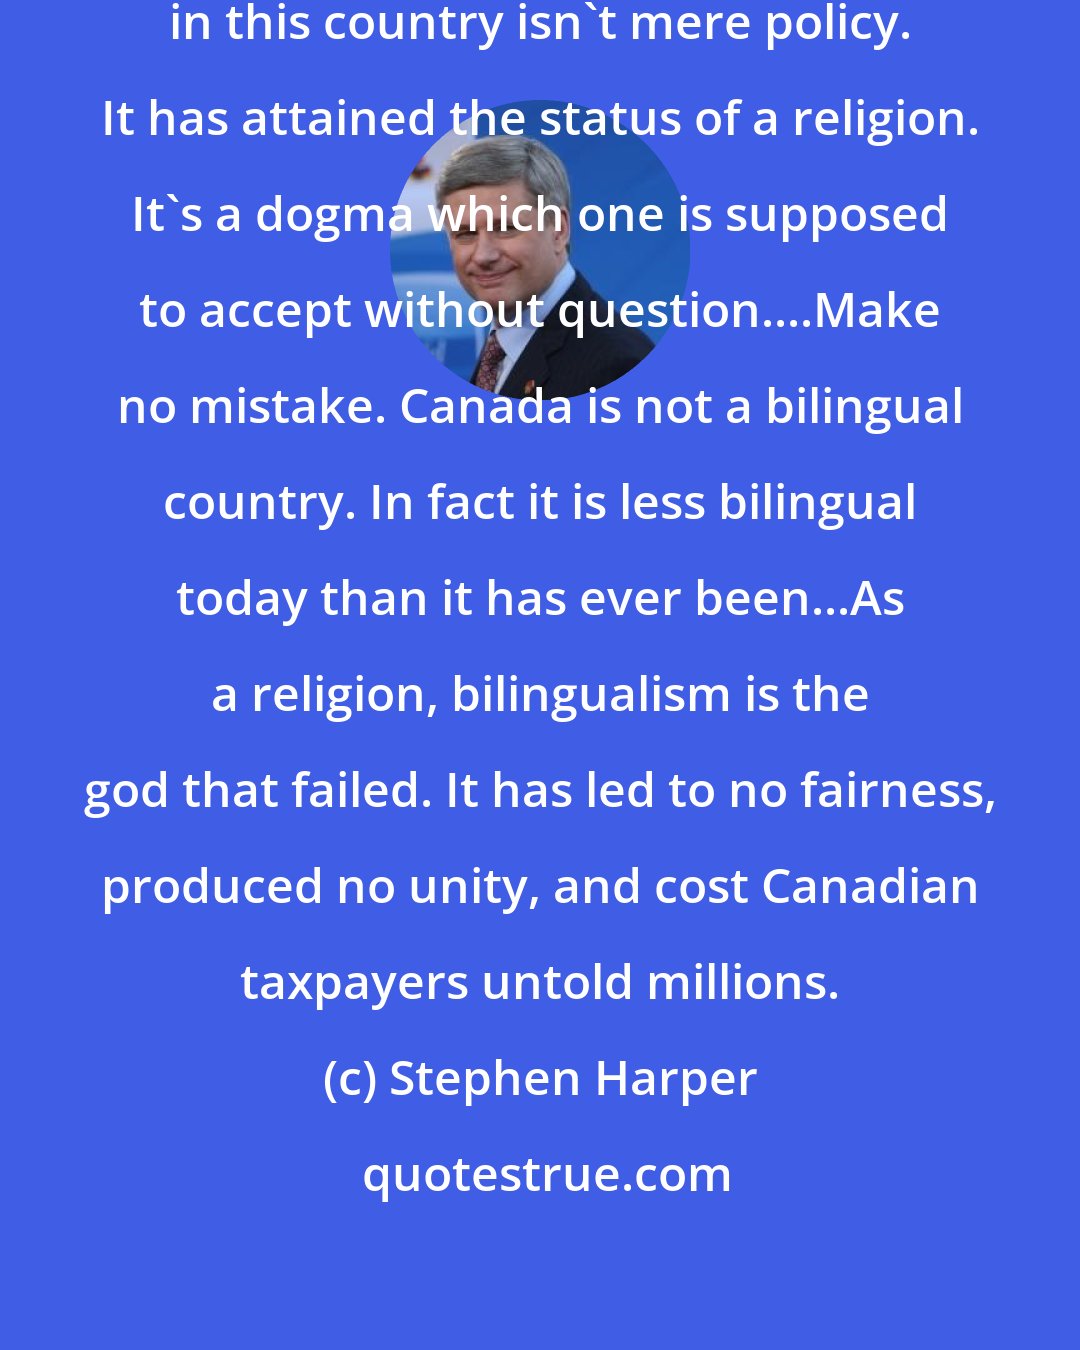 Stephen Harper: After all, enforced national bilingualism in this country isn't mere policy. It has attained the status of a religion. It's a dogma which one is supposed to accept without question....Make no mistake. Canada is not a bilingual country. In fact it is less bilingual today than it has ever been...As a religion, bilingualism is the god that failed. It has led to no fairness, produced no unity, and cost Canadian taxpayers untold millions.